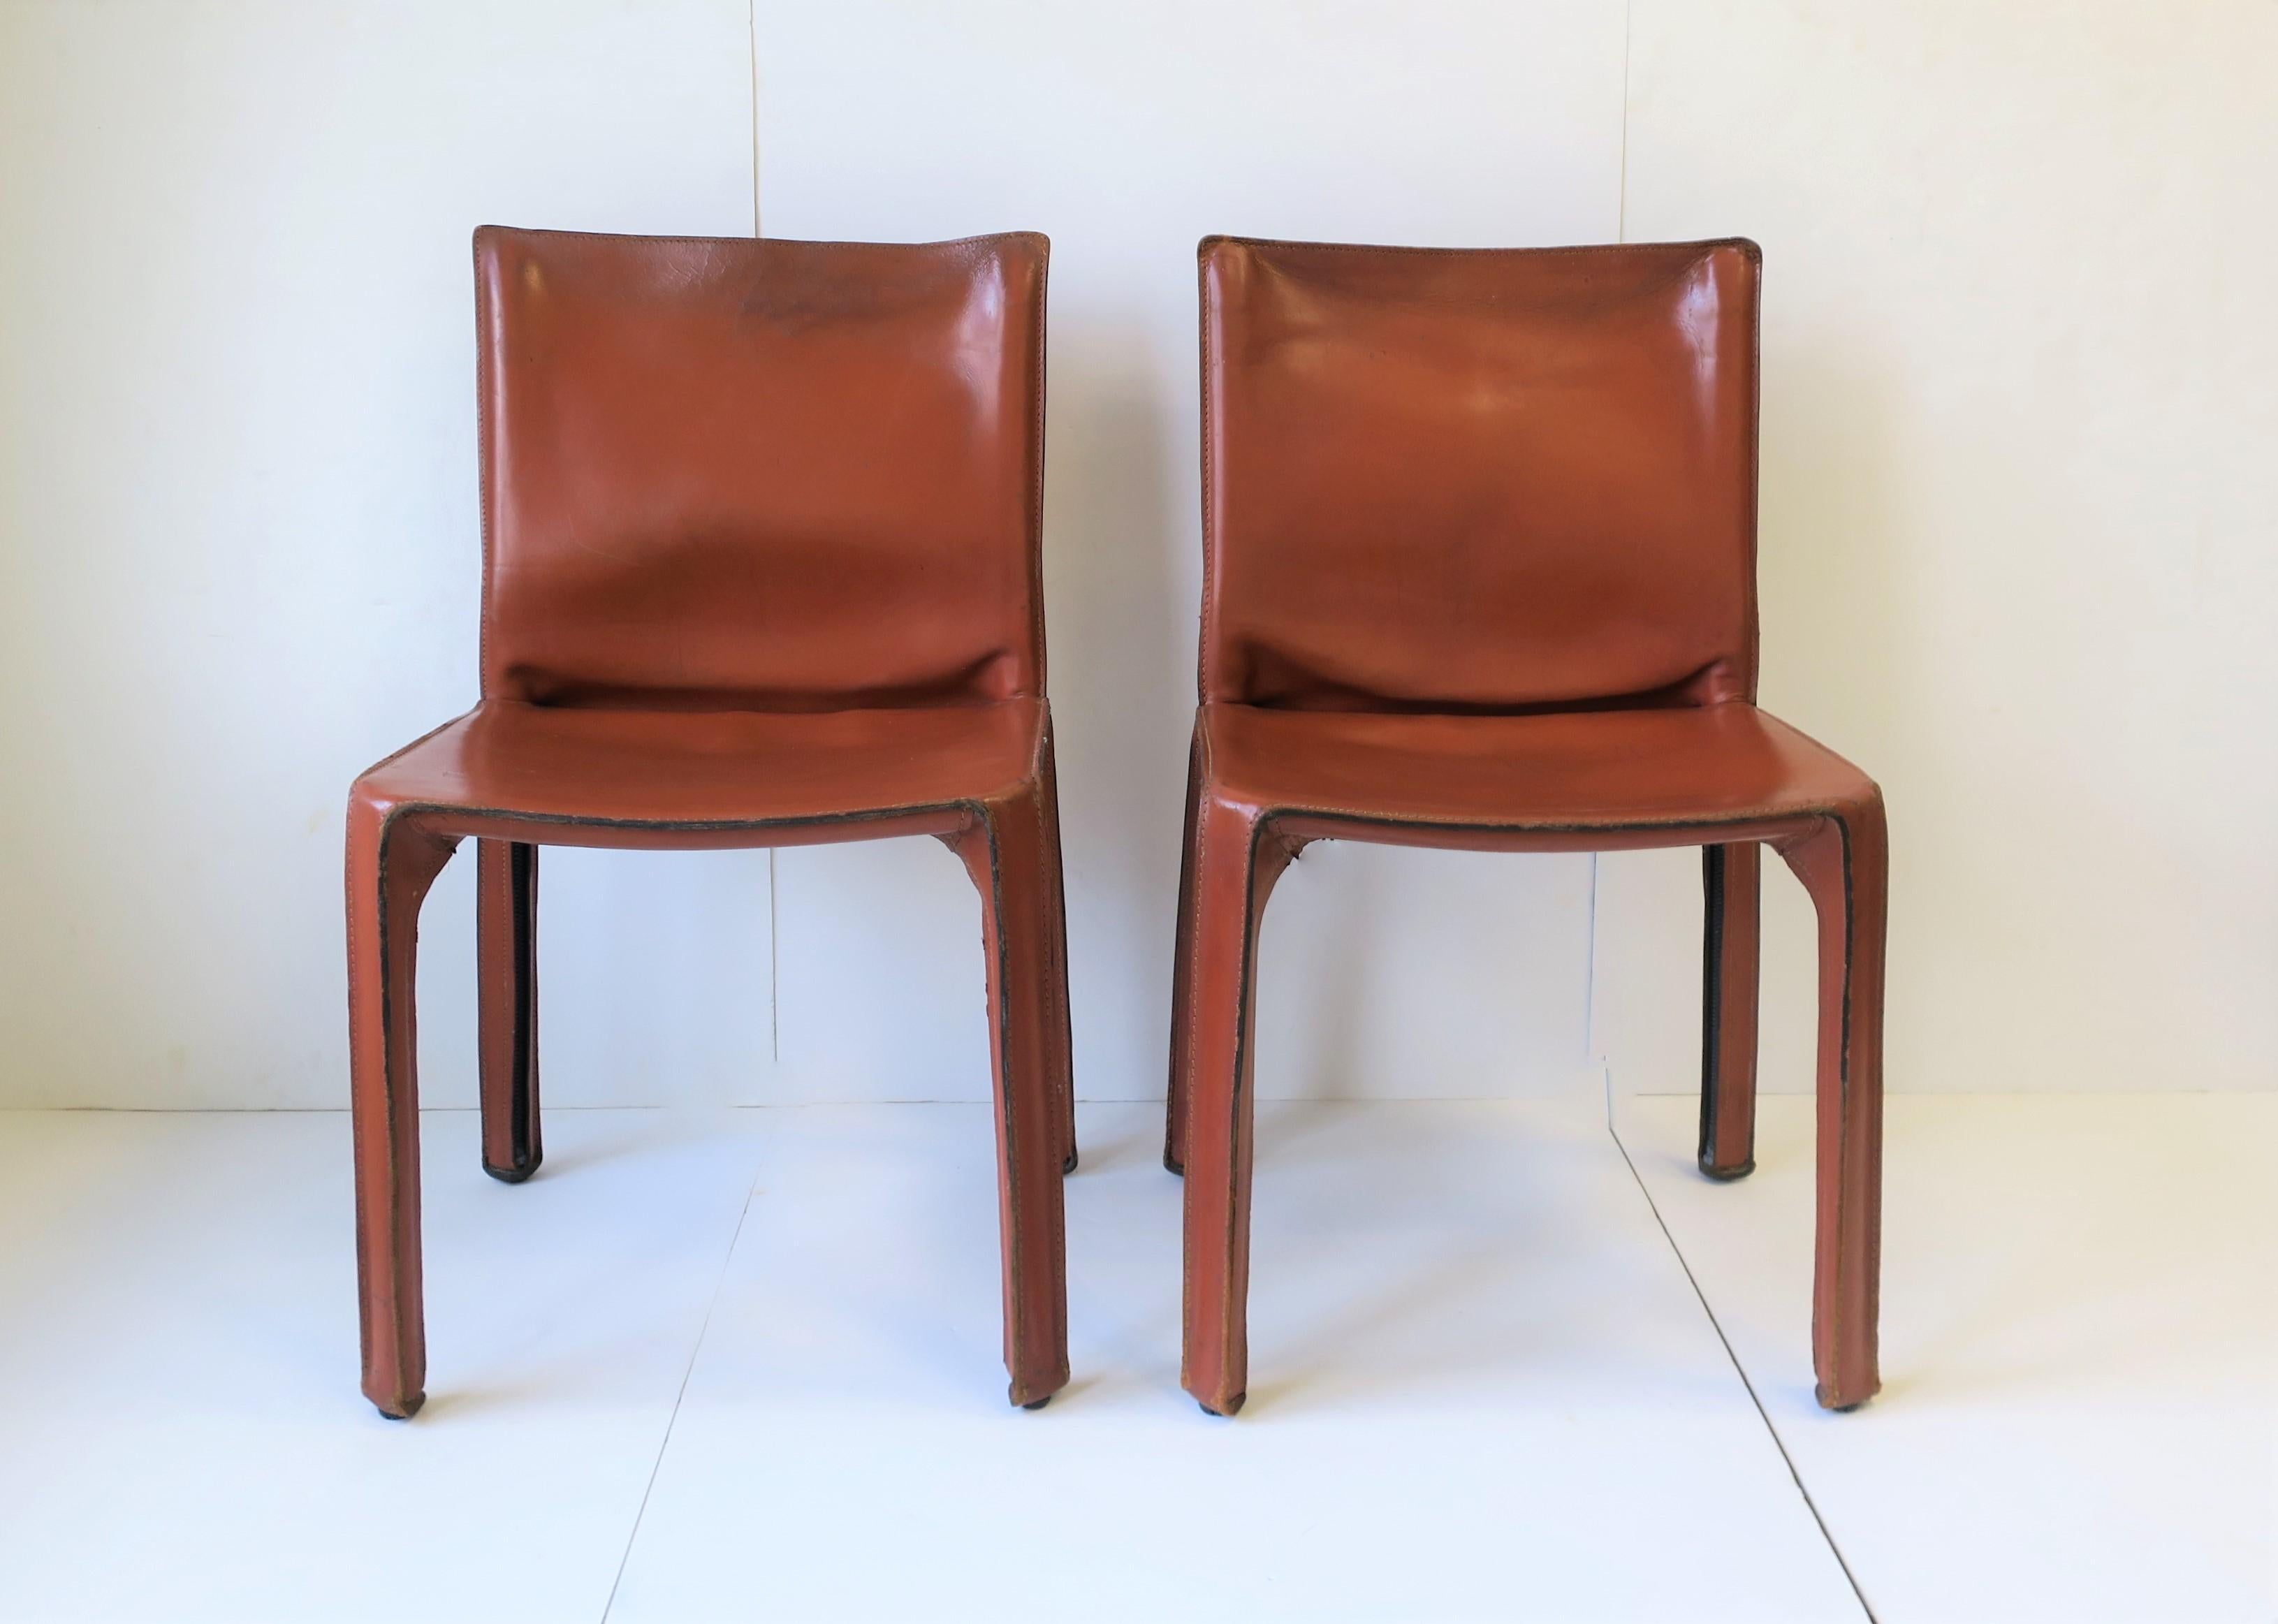 Iconic leather 'Cab' side chairs designed by Mario Bellini for Cassina. Chairs are being offered as 'per item' price. Buy one or two. There are two available. Leather is a 'honey brown' hue. 
 